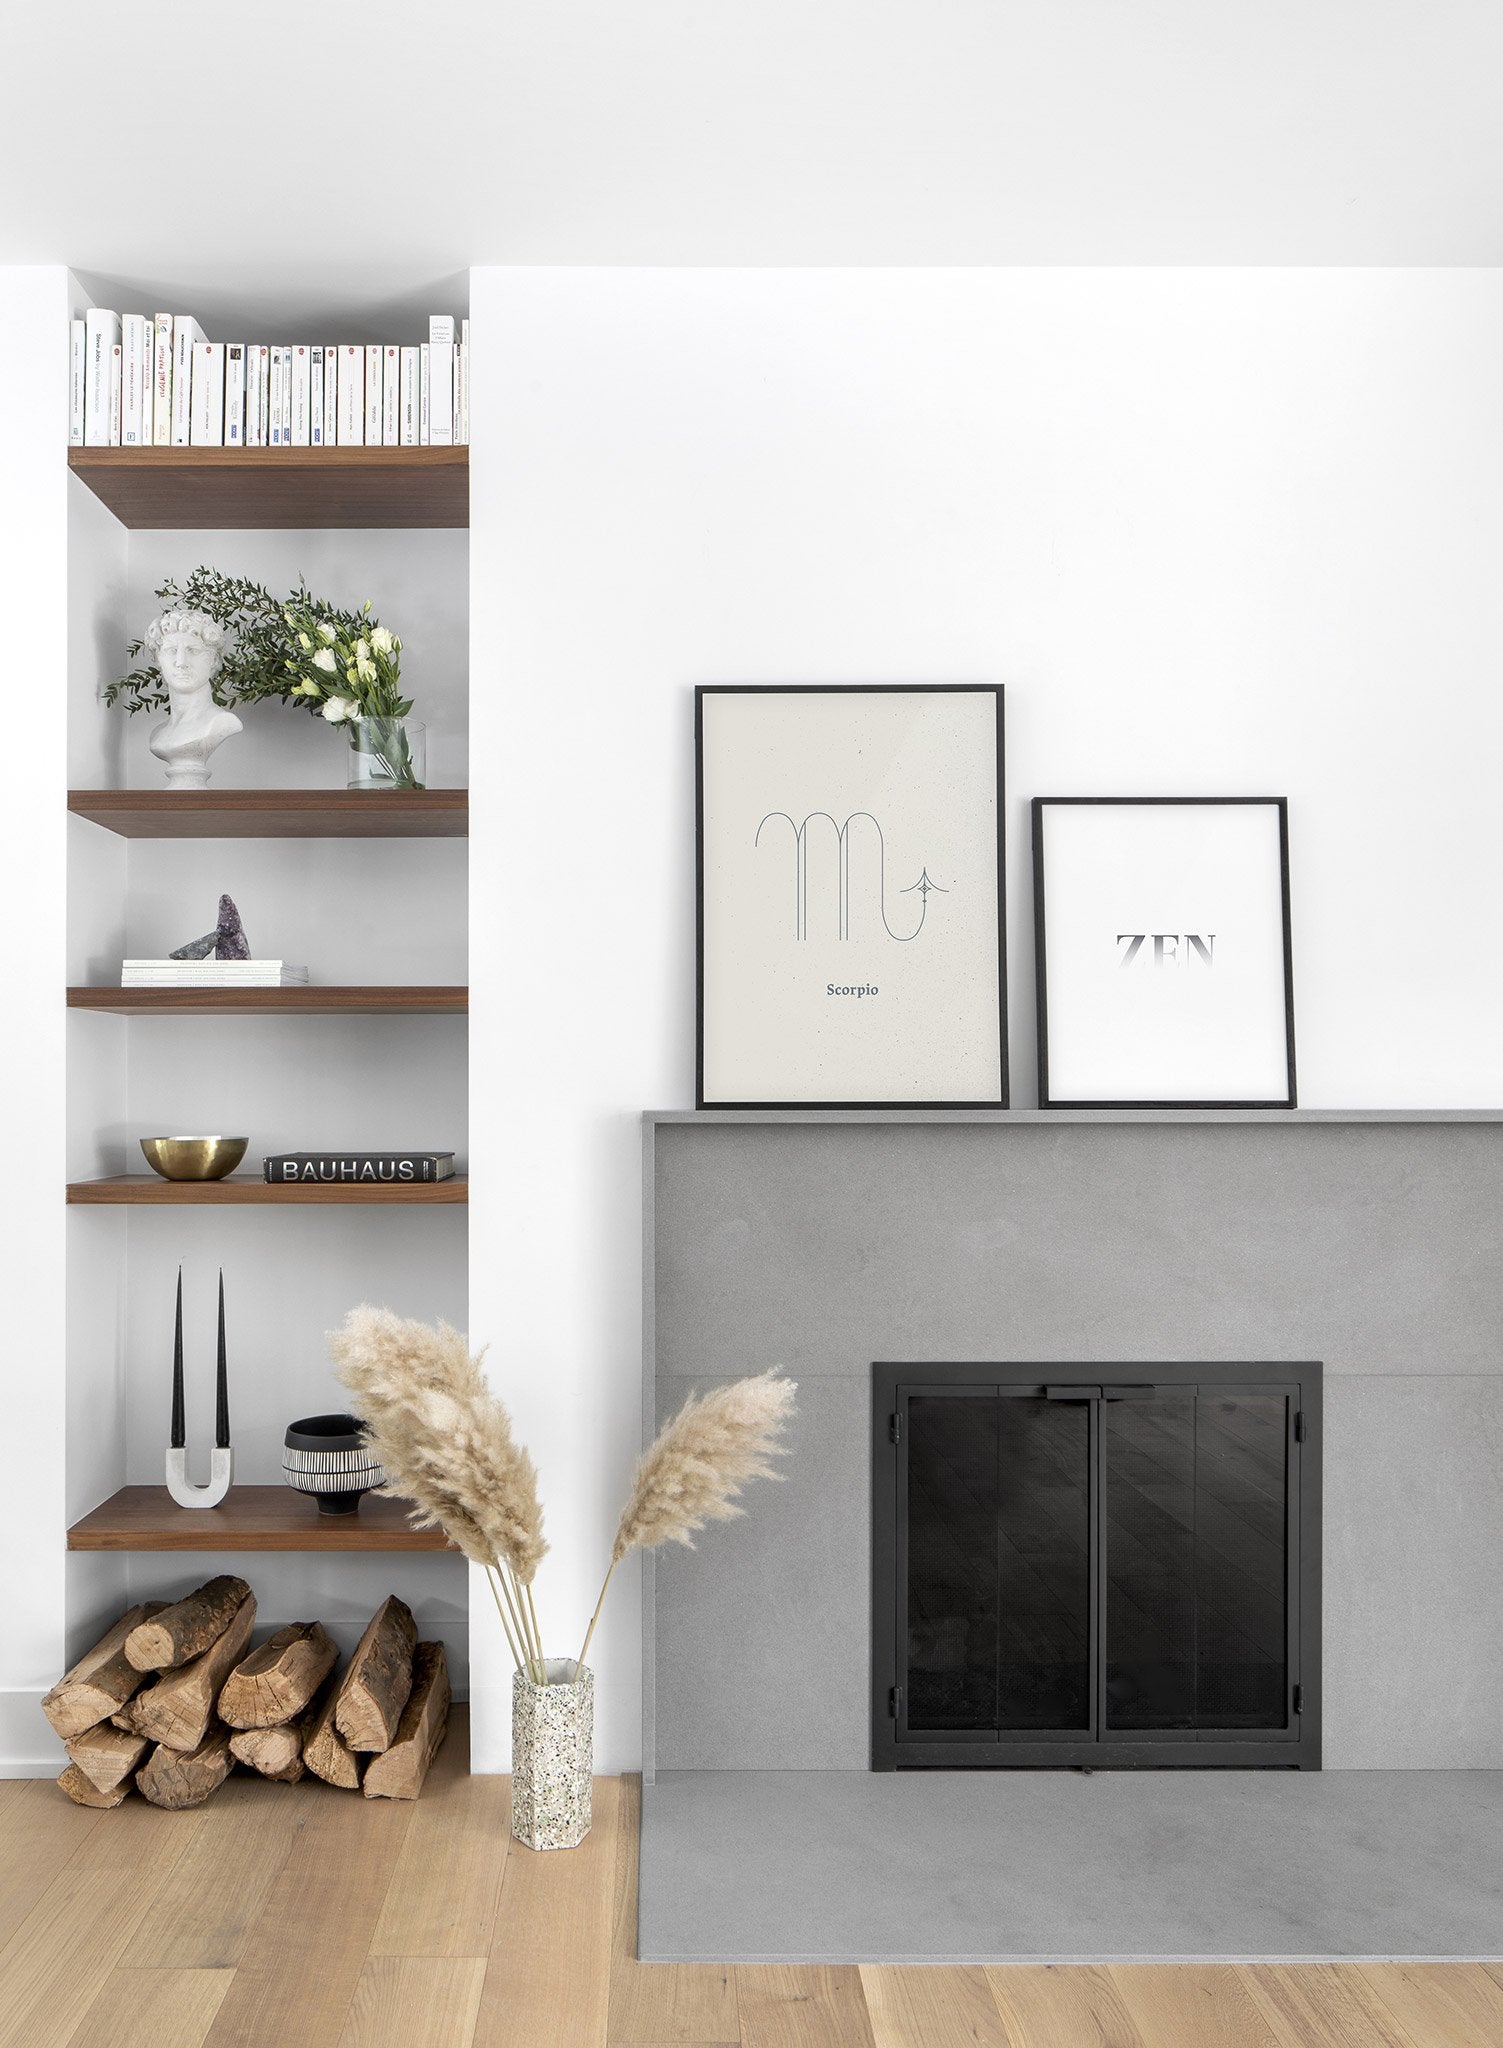 Minimalist celestial illustration poster by Opposite Wall with Scorpio symbol - Lifestyle Duo - Living Room